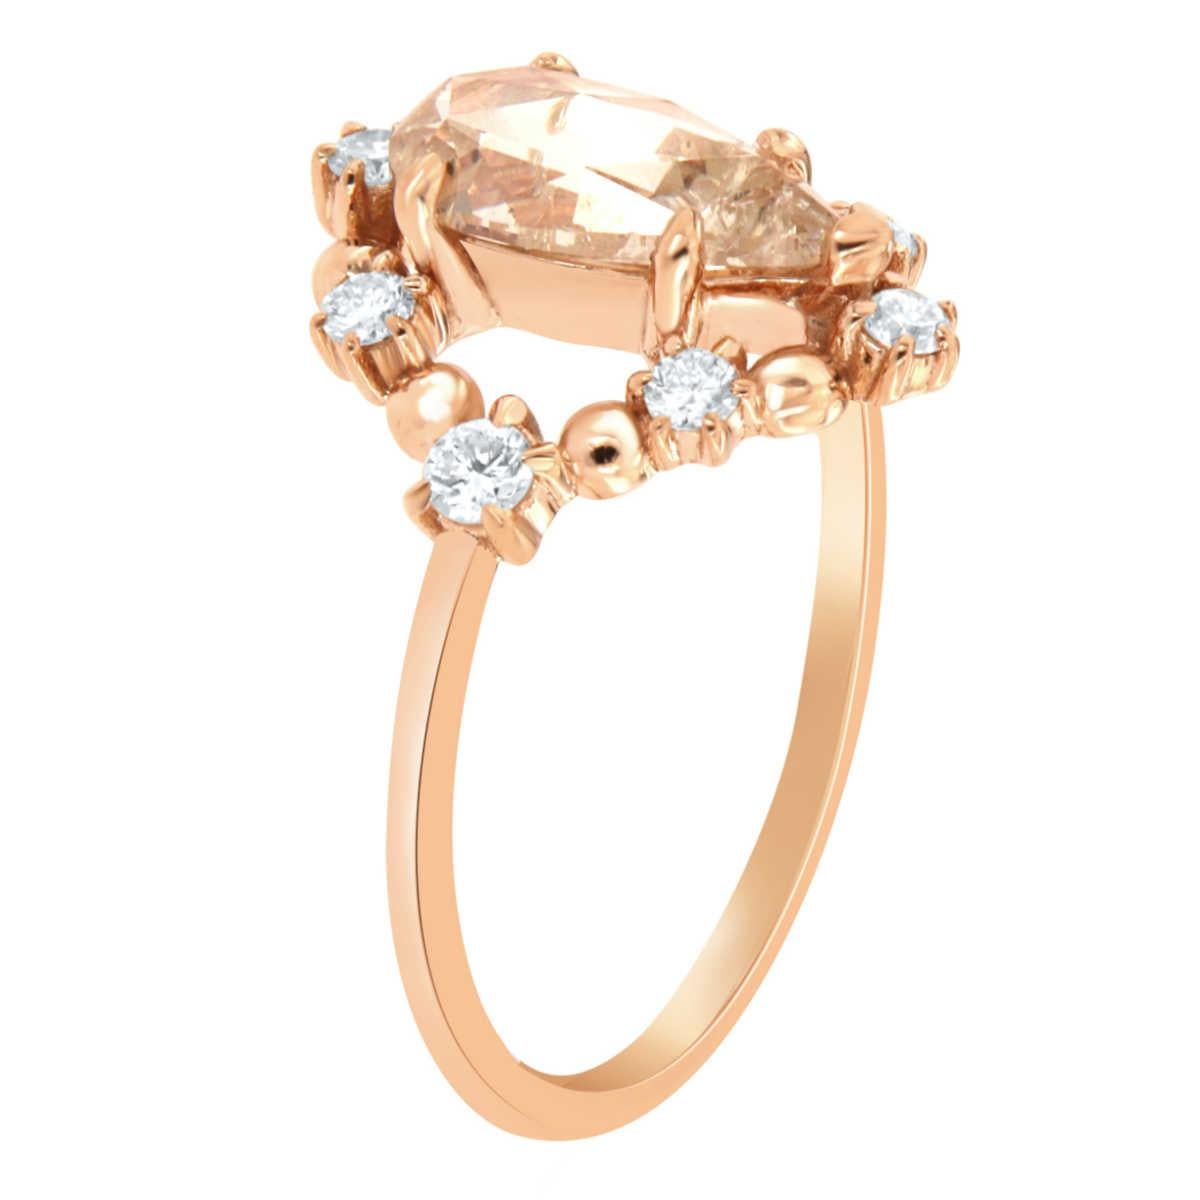 This 18k Rose gold delicate rustic ring features a 1.10 Carat Pear shape faceted brilliant light champagne color Natural Diamond encircled by a scattered halo of eight (8) brilliant round diamonds on top of a 1.3 MM wide band. 
The total diamond